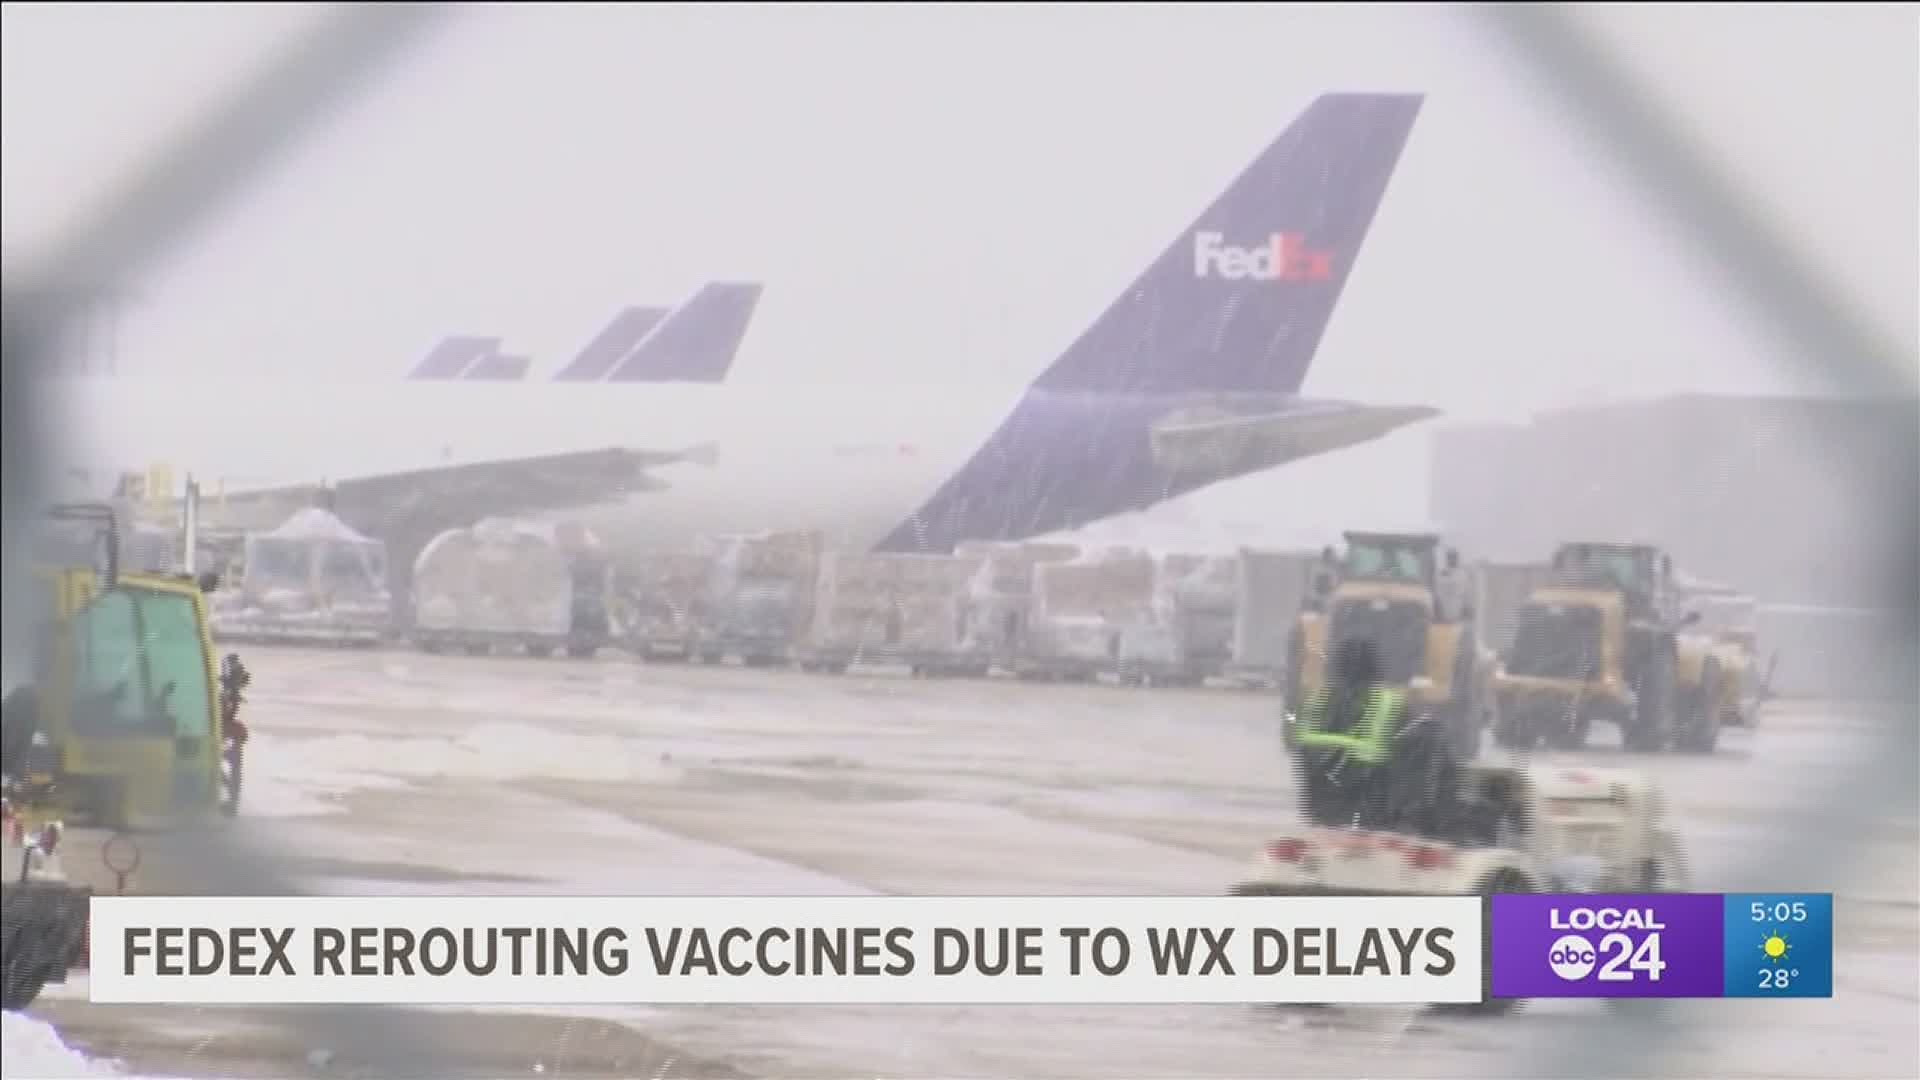 Vaccine shipments continue to move through the FedEx network in areas unimpacted by the winter storm